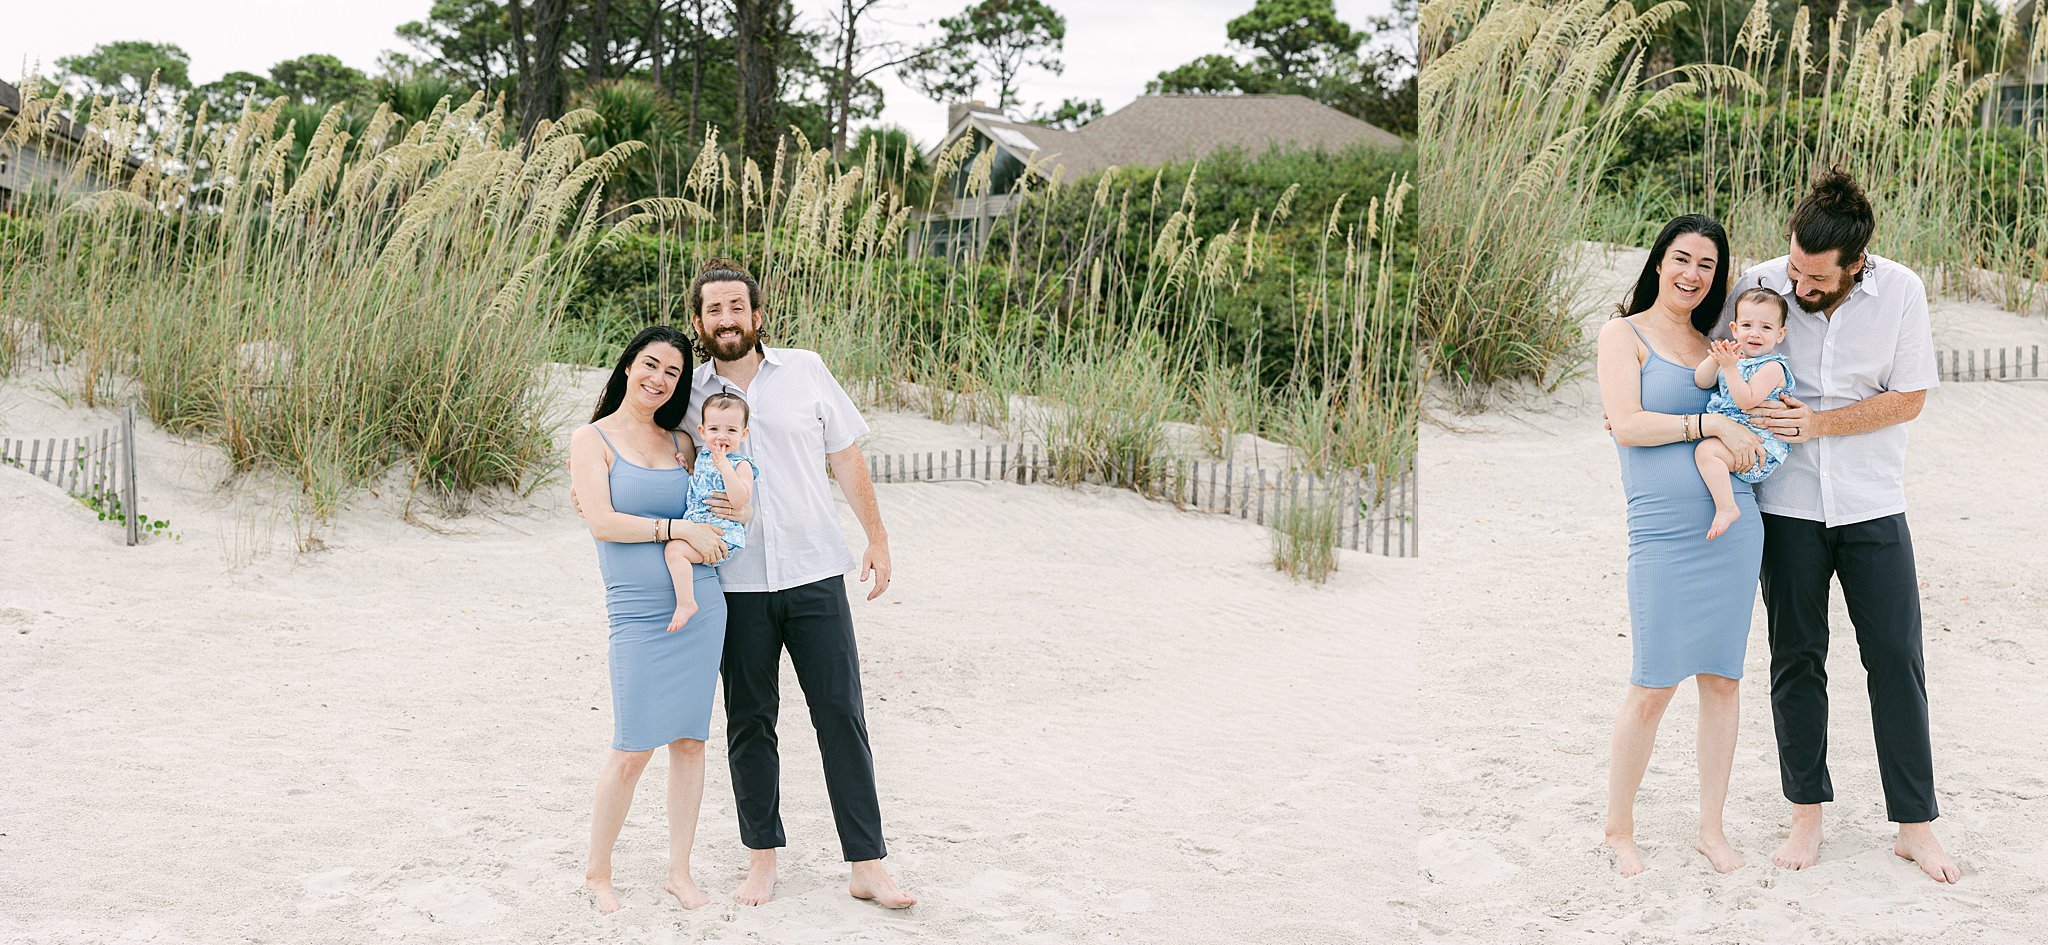 Katherine_Ives_Photography_Kersner_Hilton_Head_Extended_Family_Session_173.JPG